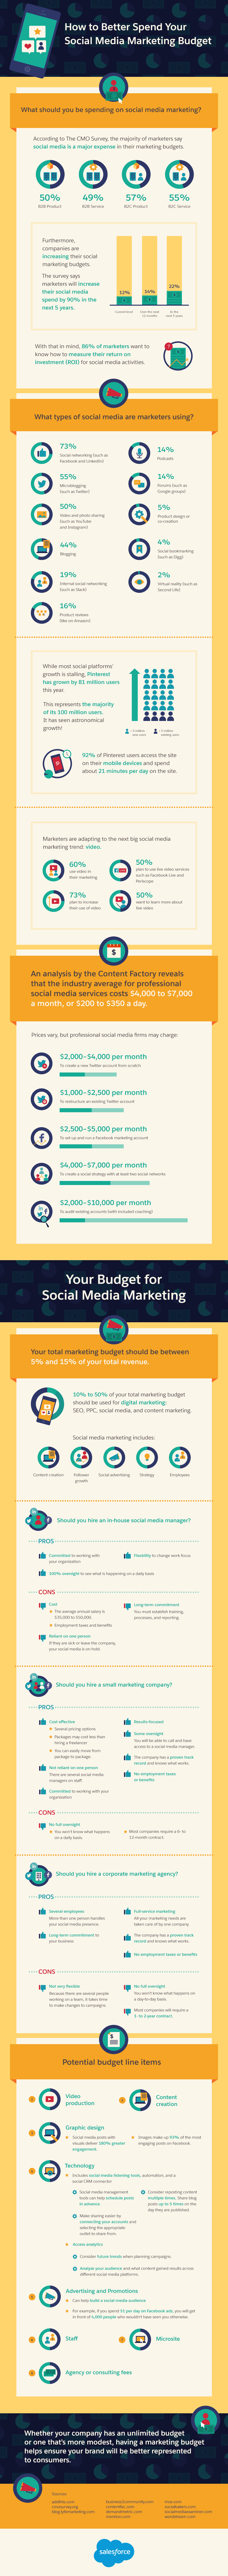 How to Better Spend Your Social Media Marketing Budget